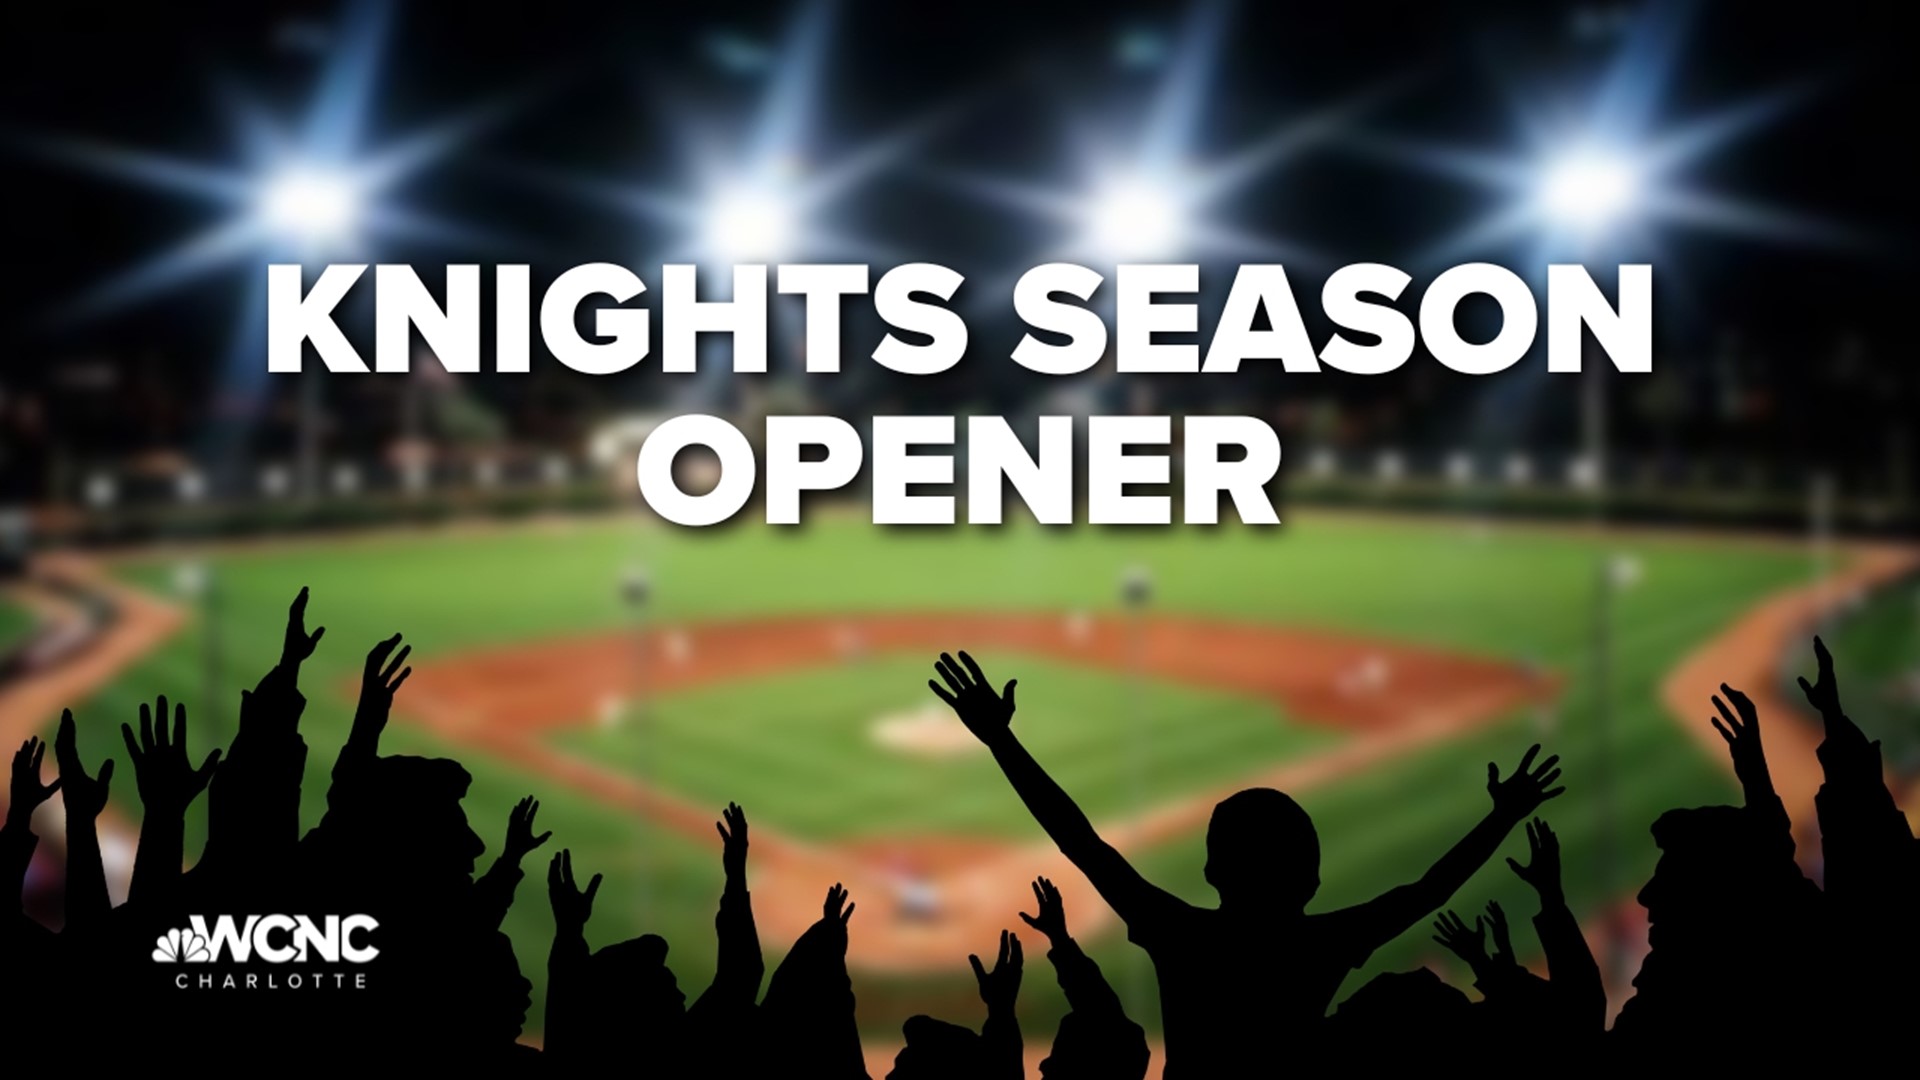 Let's play ball! It's the home opener for the Charlotte Knights, who will be facing Memphis at Truist Field.